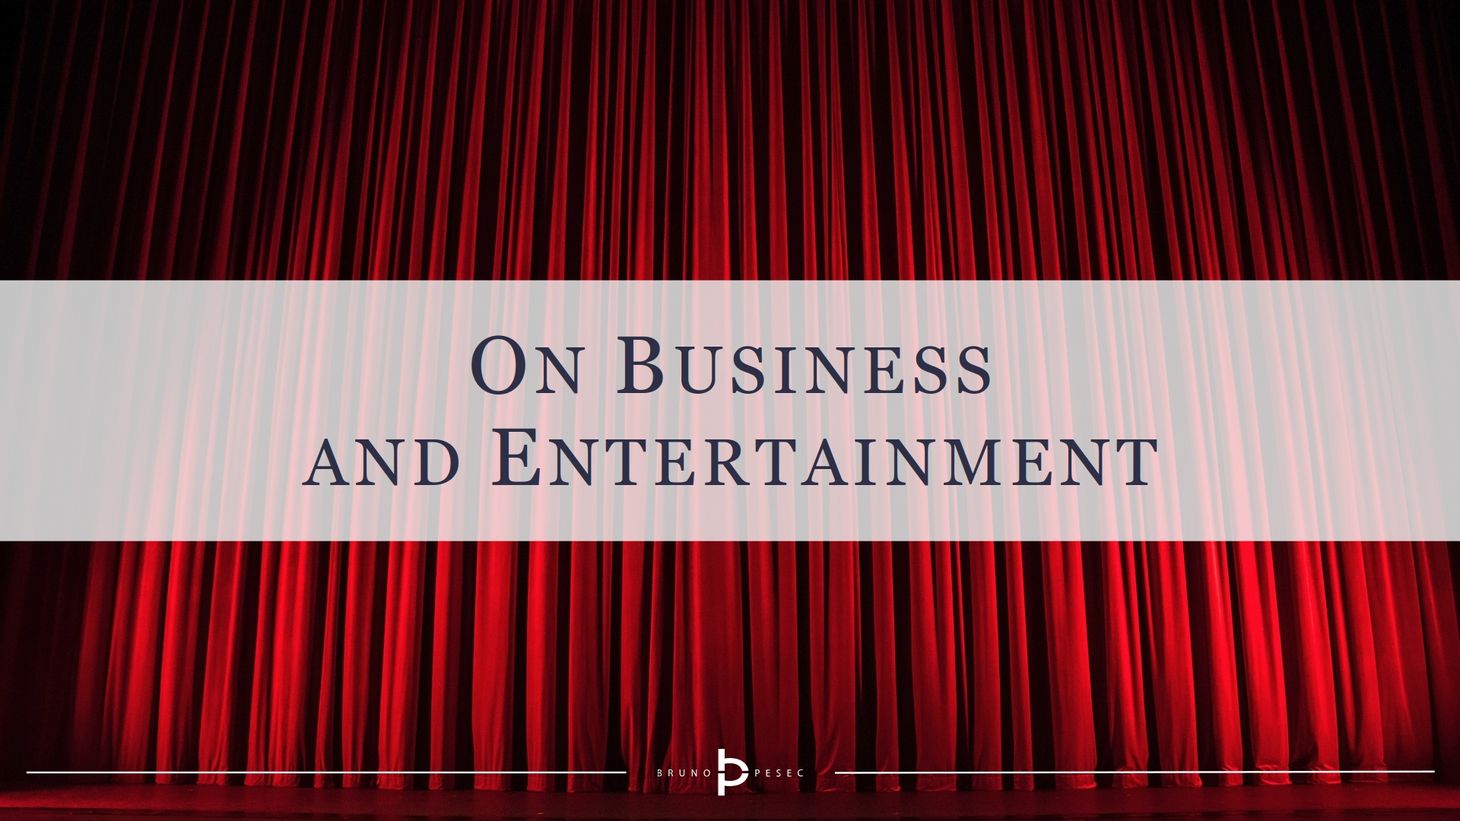 On business and entertainment